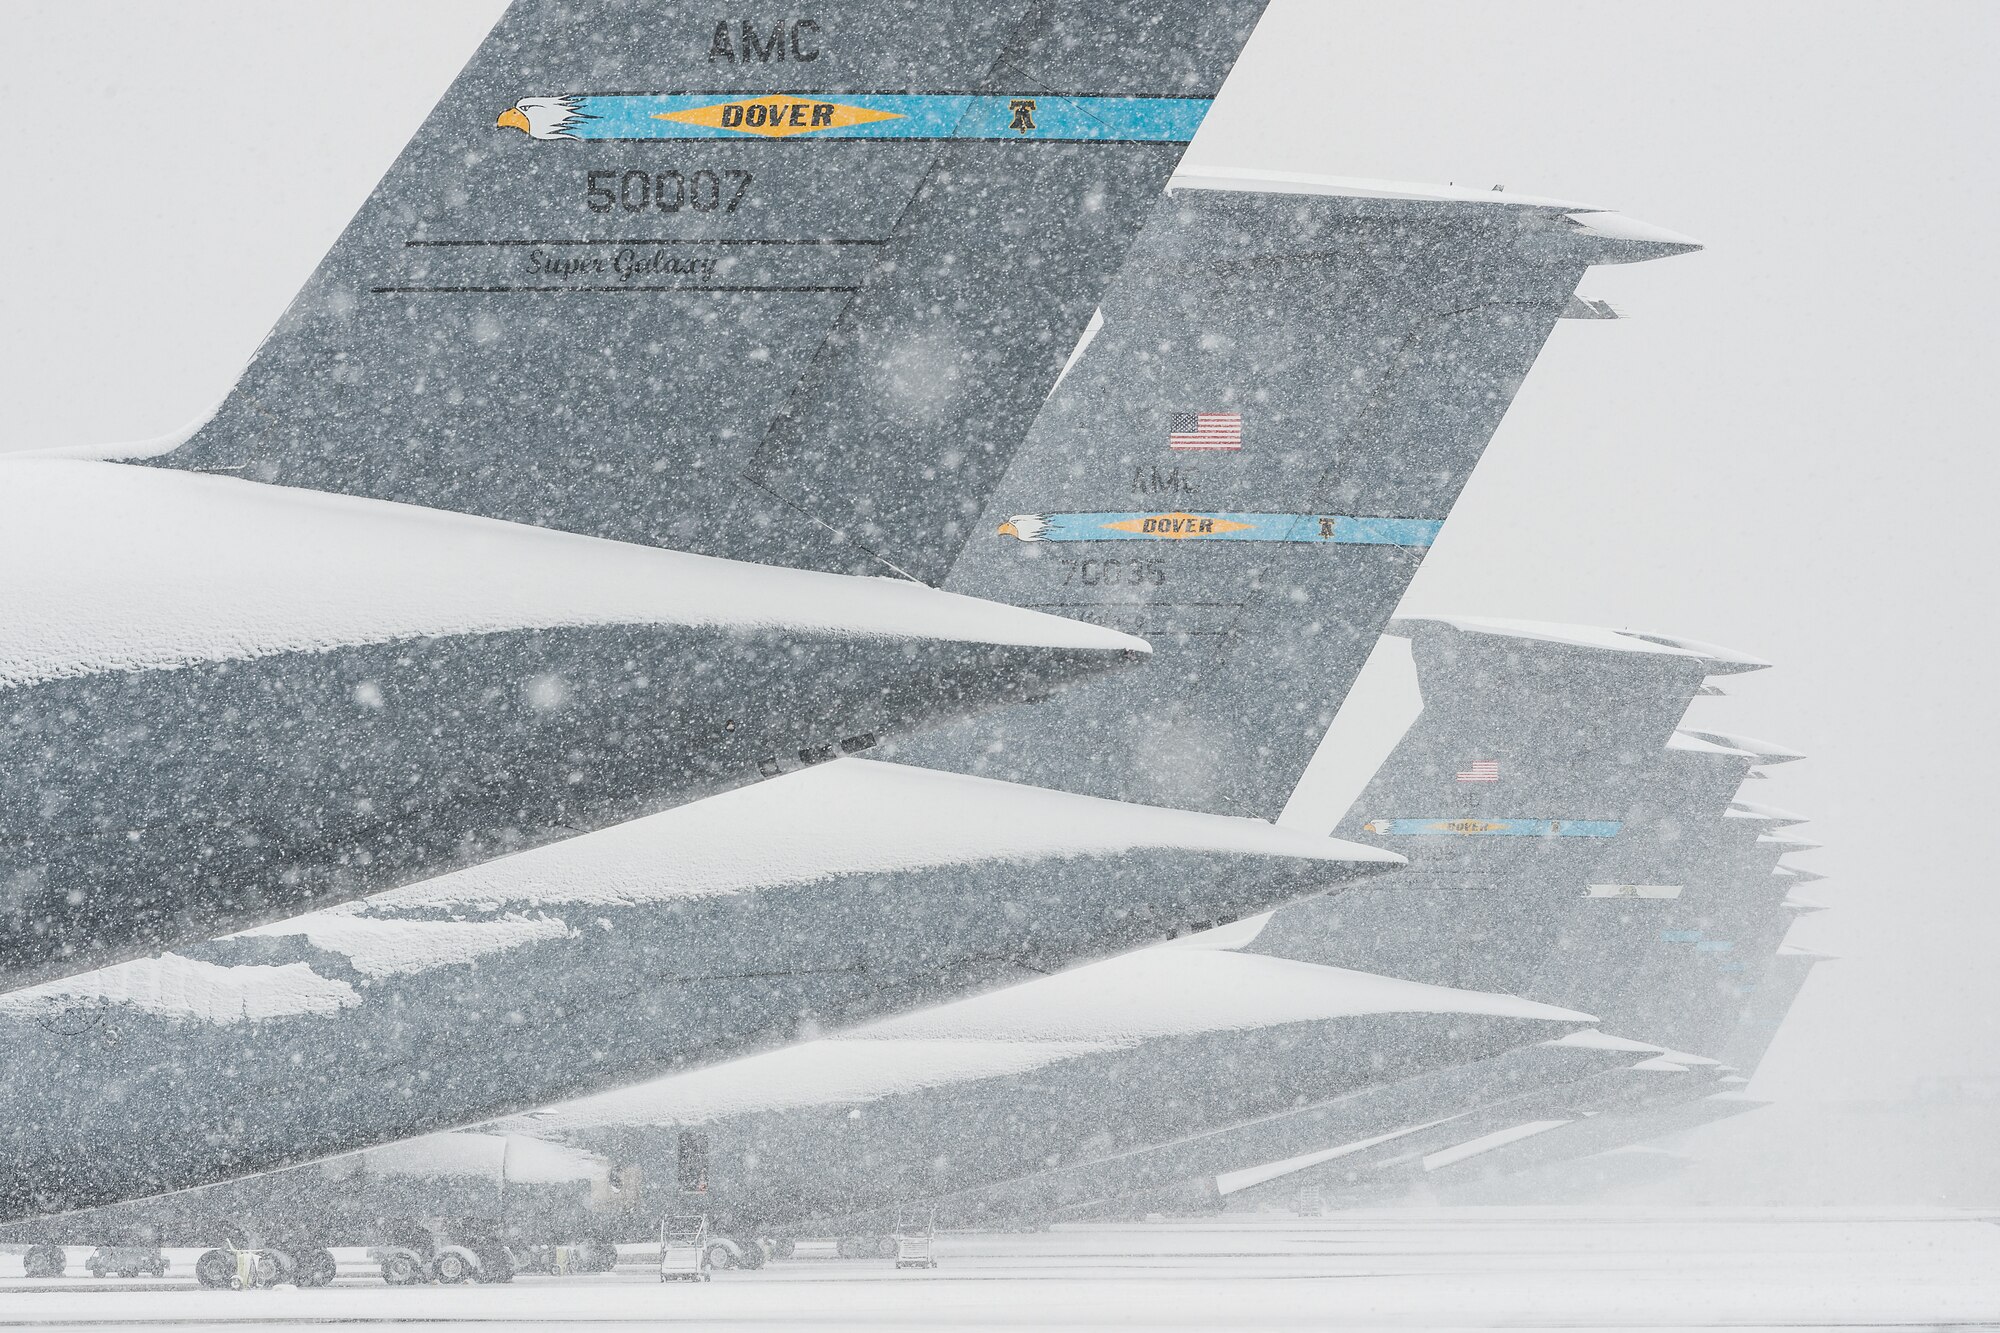 Tails of snow-covered C-5M Super Galaxy aircraft sit on the flight line at Dover Air Force Base, Delaware, Feb. 11, 2021. As Winter Storm Roland produced a wintry mix of precipitation, the base continued normal operations and prepared for additional forecast snowfall. (U.S. Air Force photo by Roland Balik)